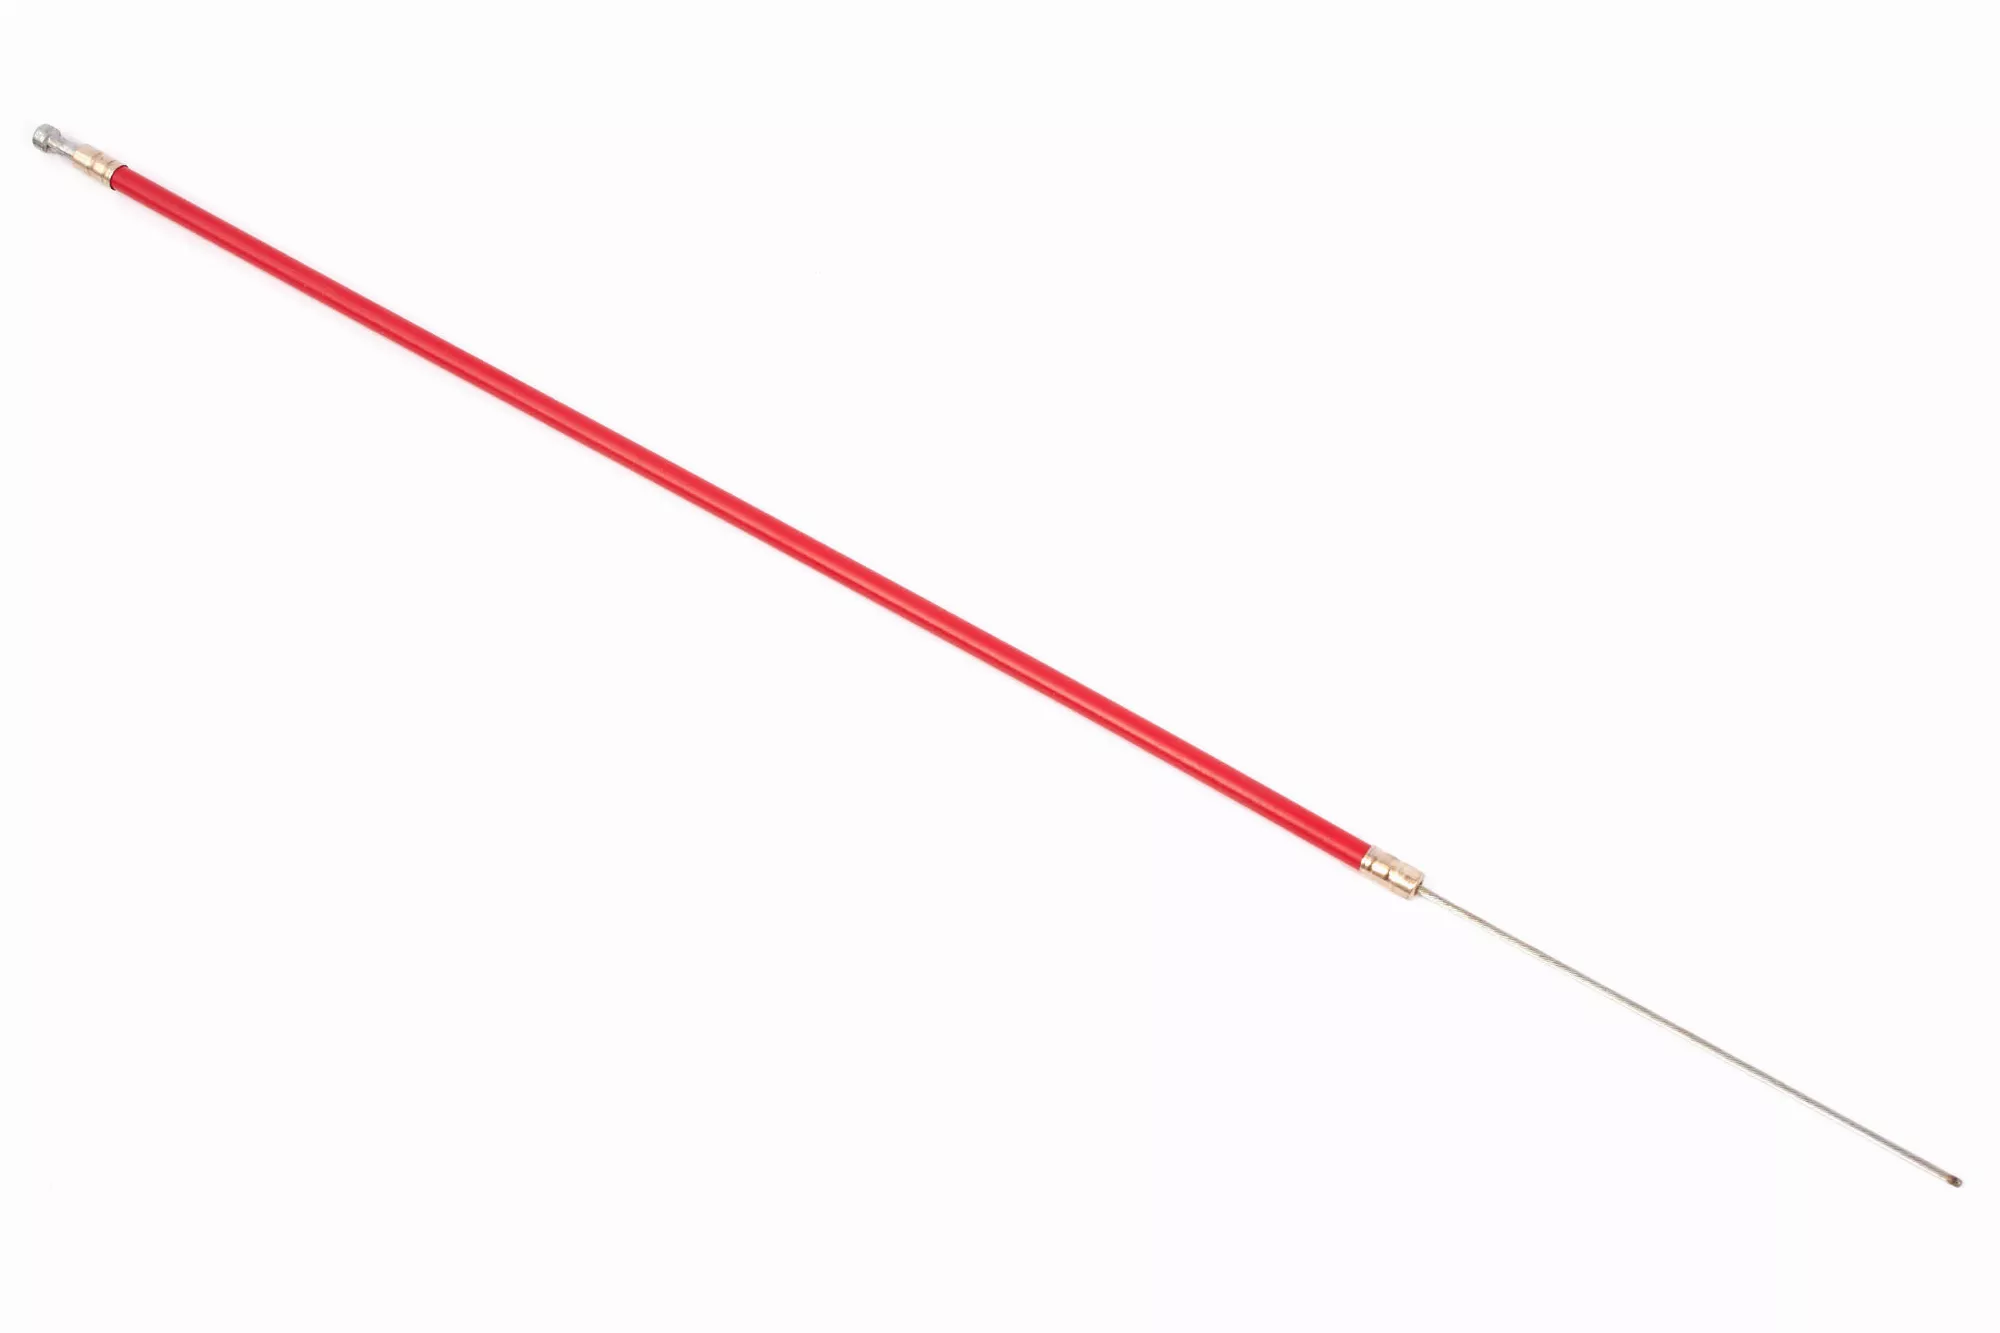 FIXIE brake cable front KHE 410mm